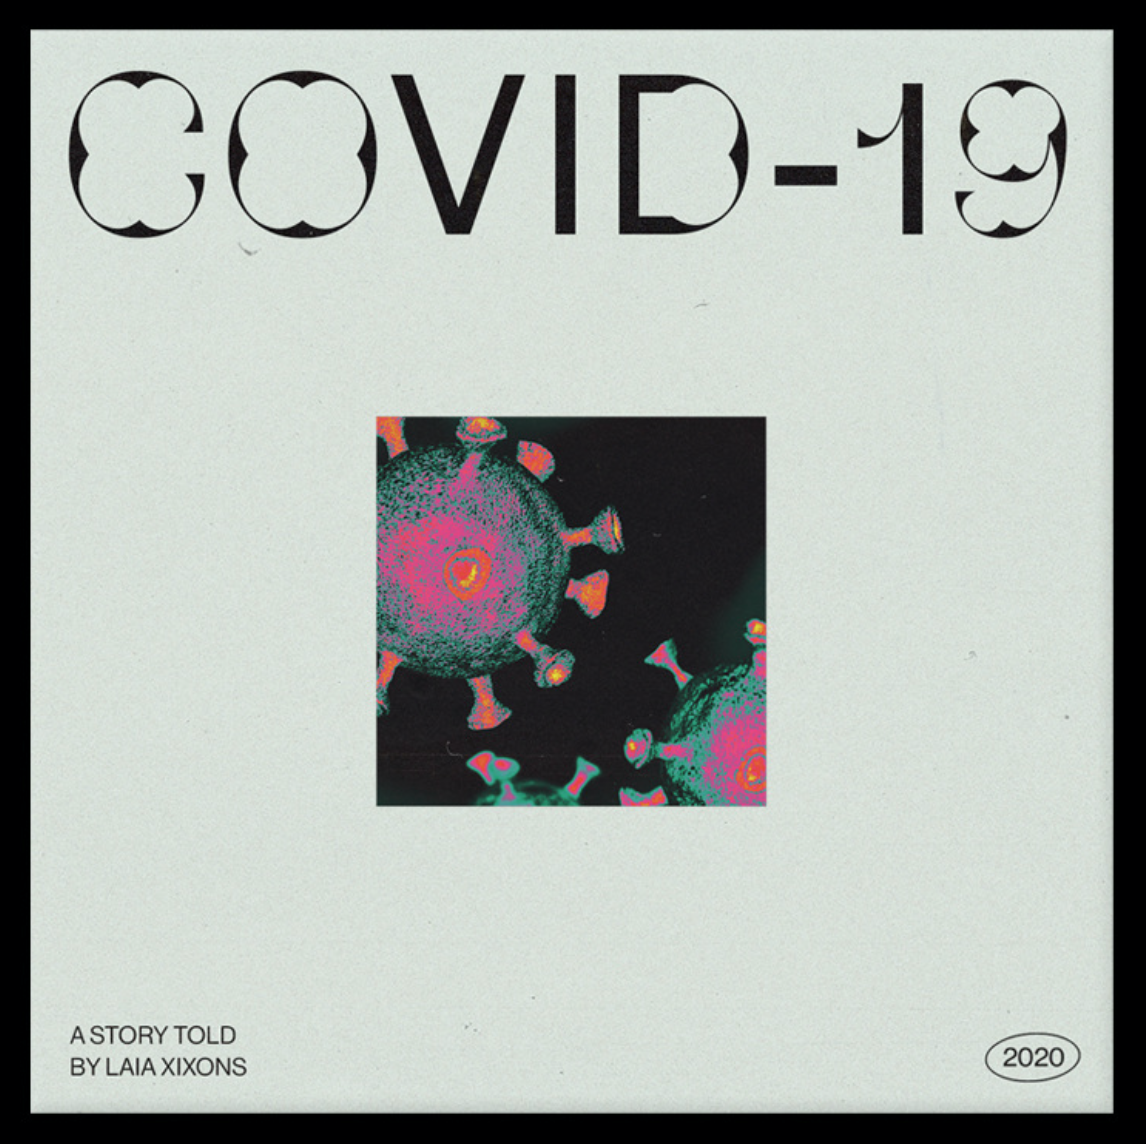 Covid-19, A story told through songs by Laia Xixons